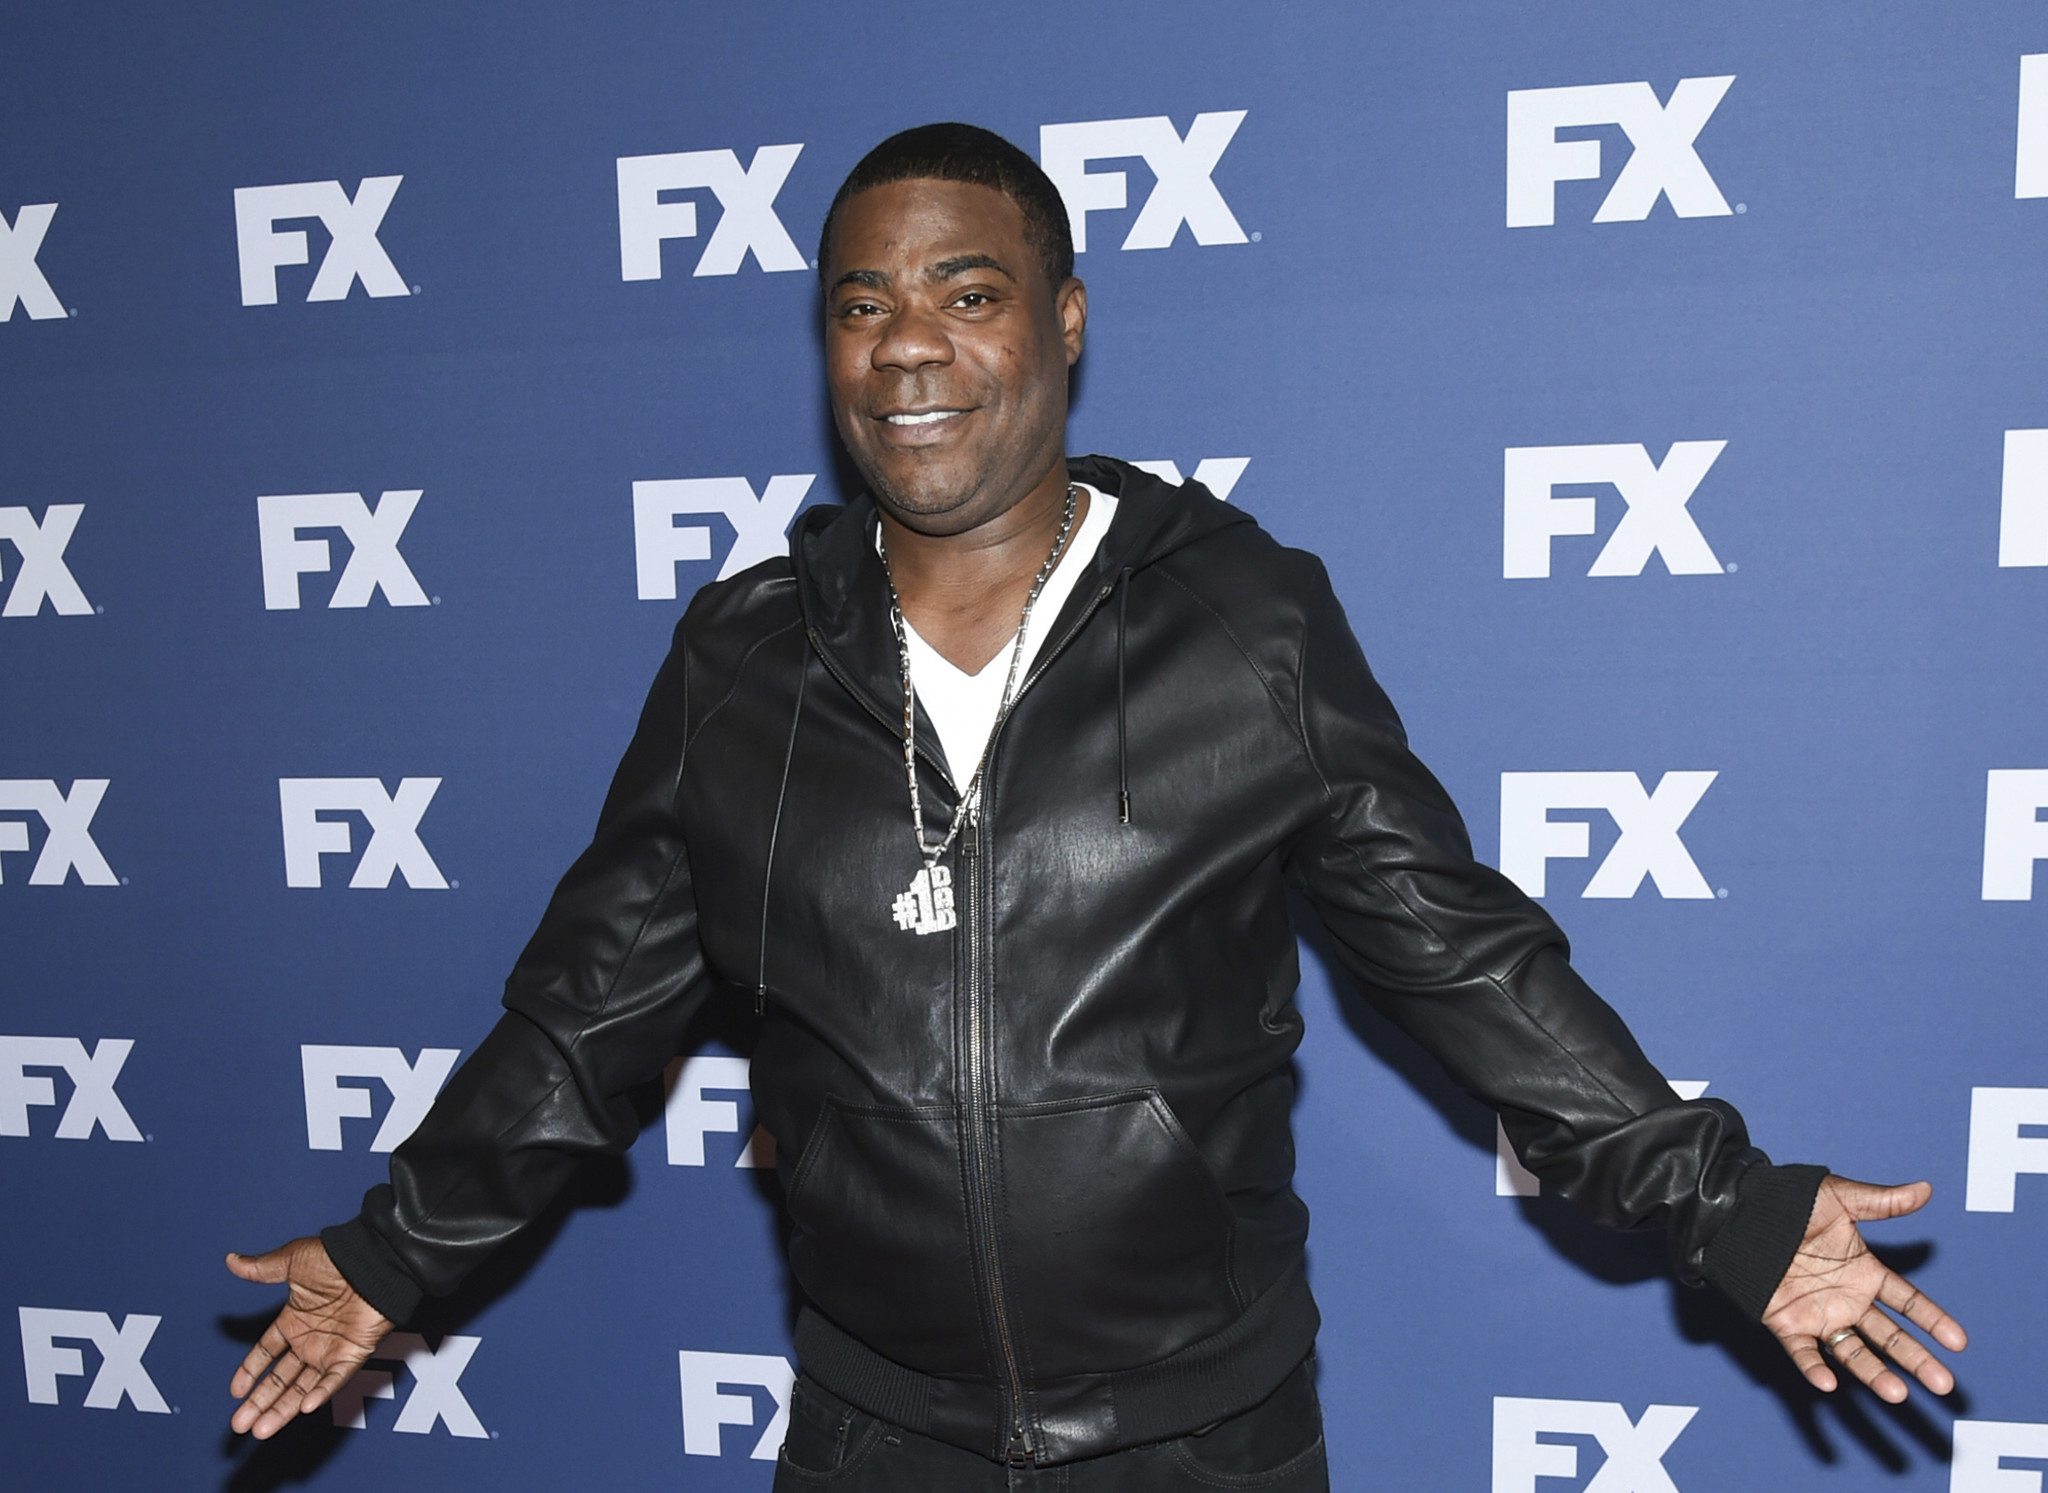 Tracy Morgan, Chris Rock, Jerry Seinfeld to star in benefit in New York - Chicago Tribune